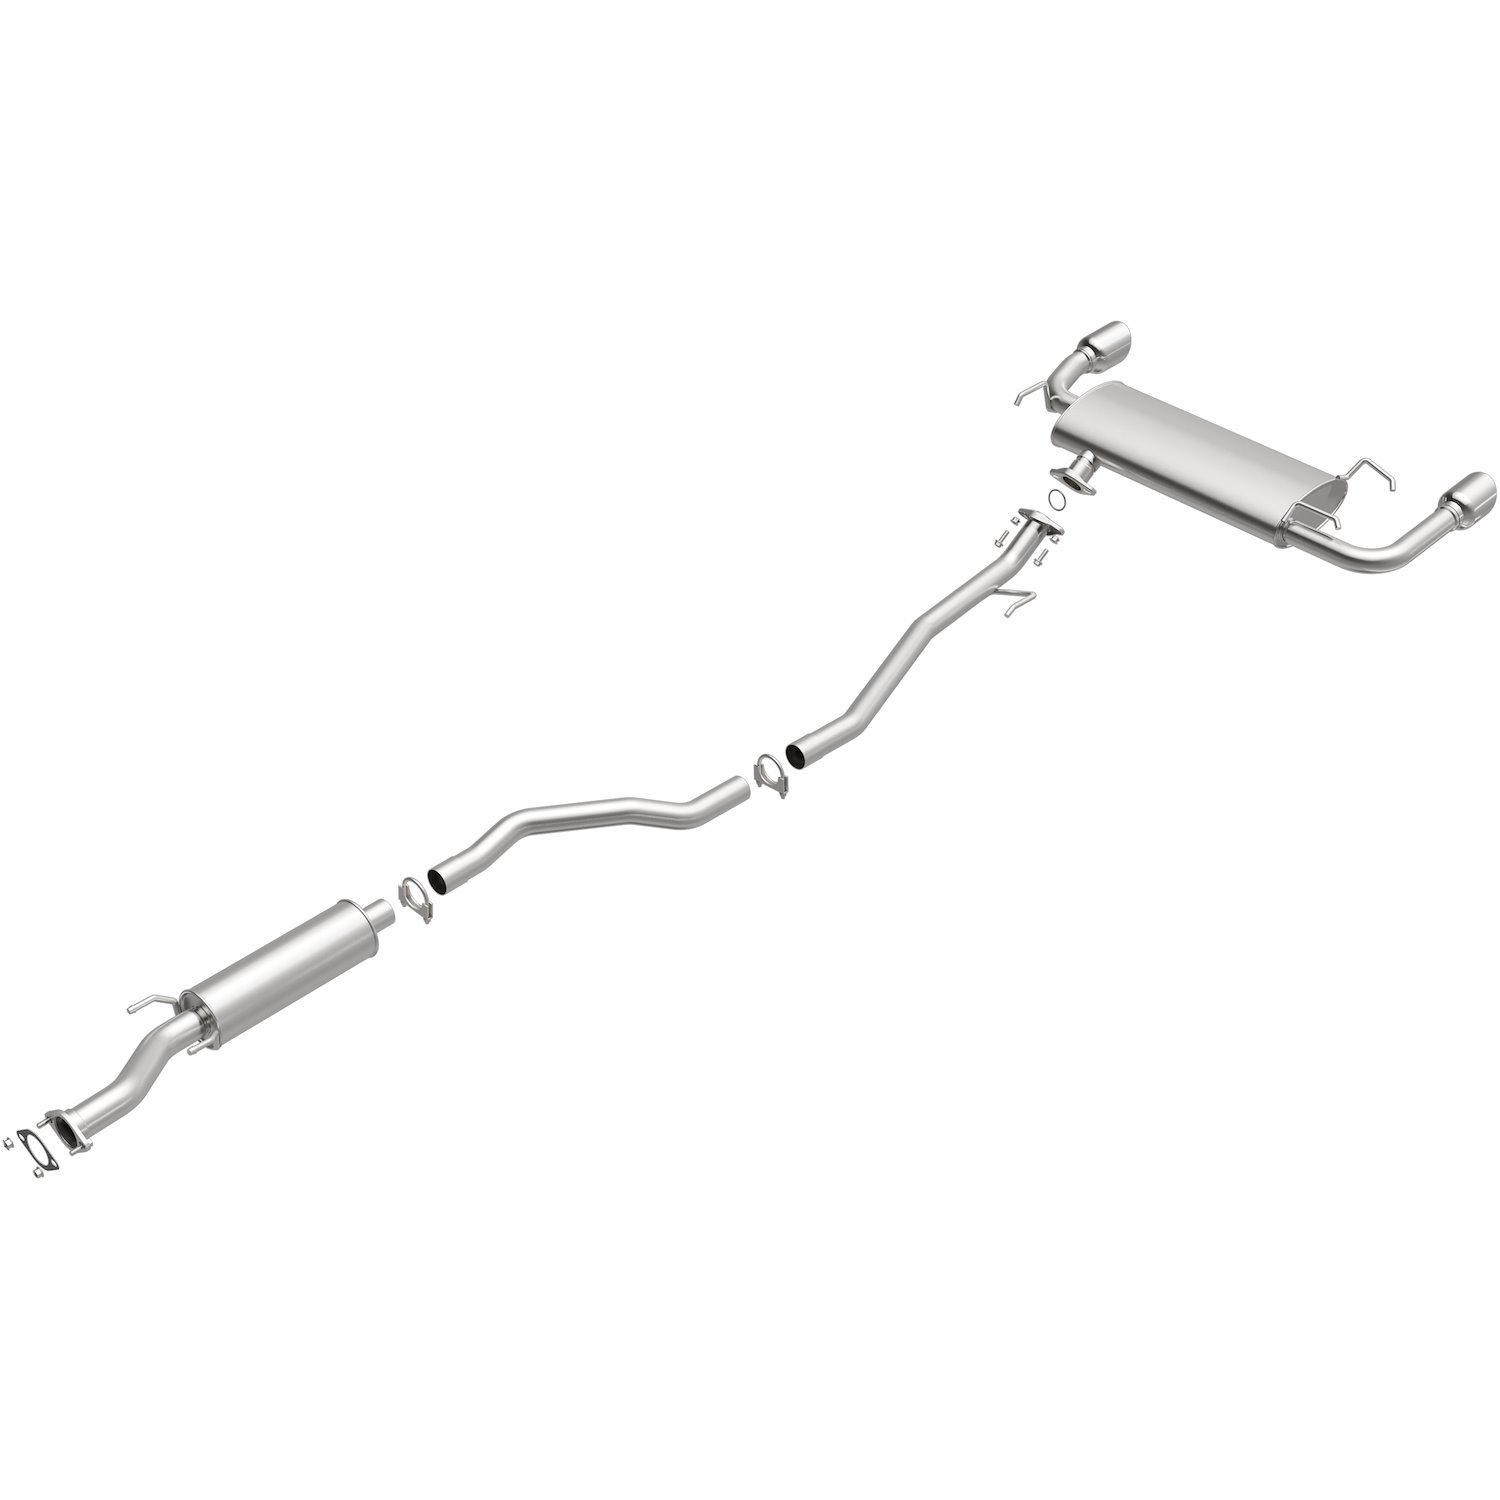 Direct-Fit Exhaust Kit, 2009-2014 Nissan Murano 3.5L